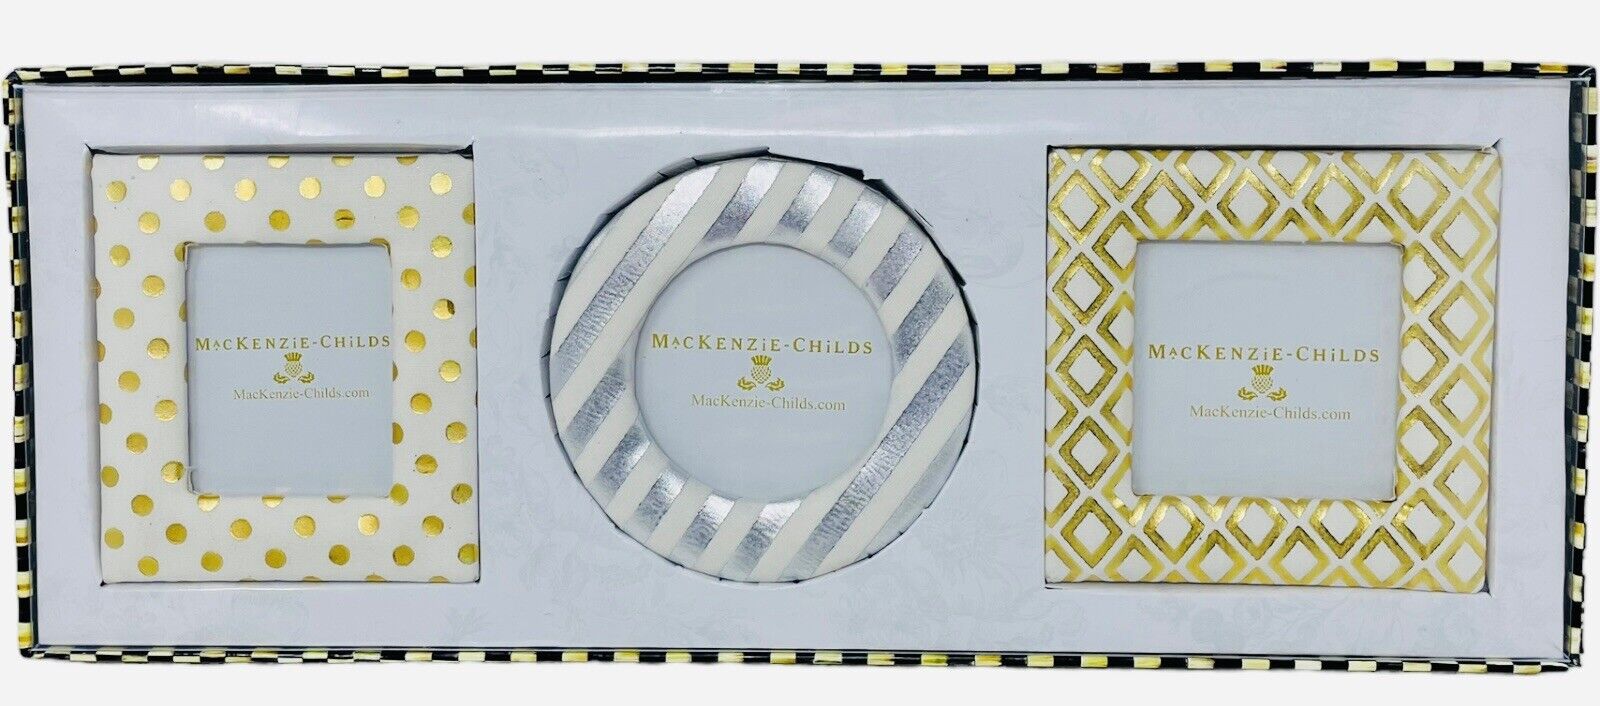 Mackenzie Childs Sweetbriar Picture Frame Set of 3 New in Box Gold Silver